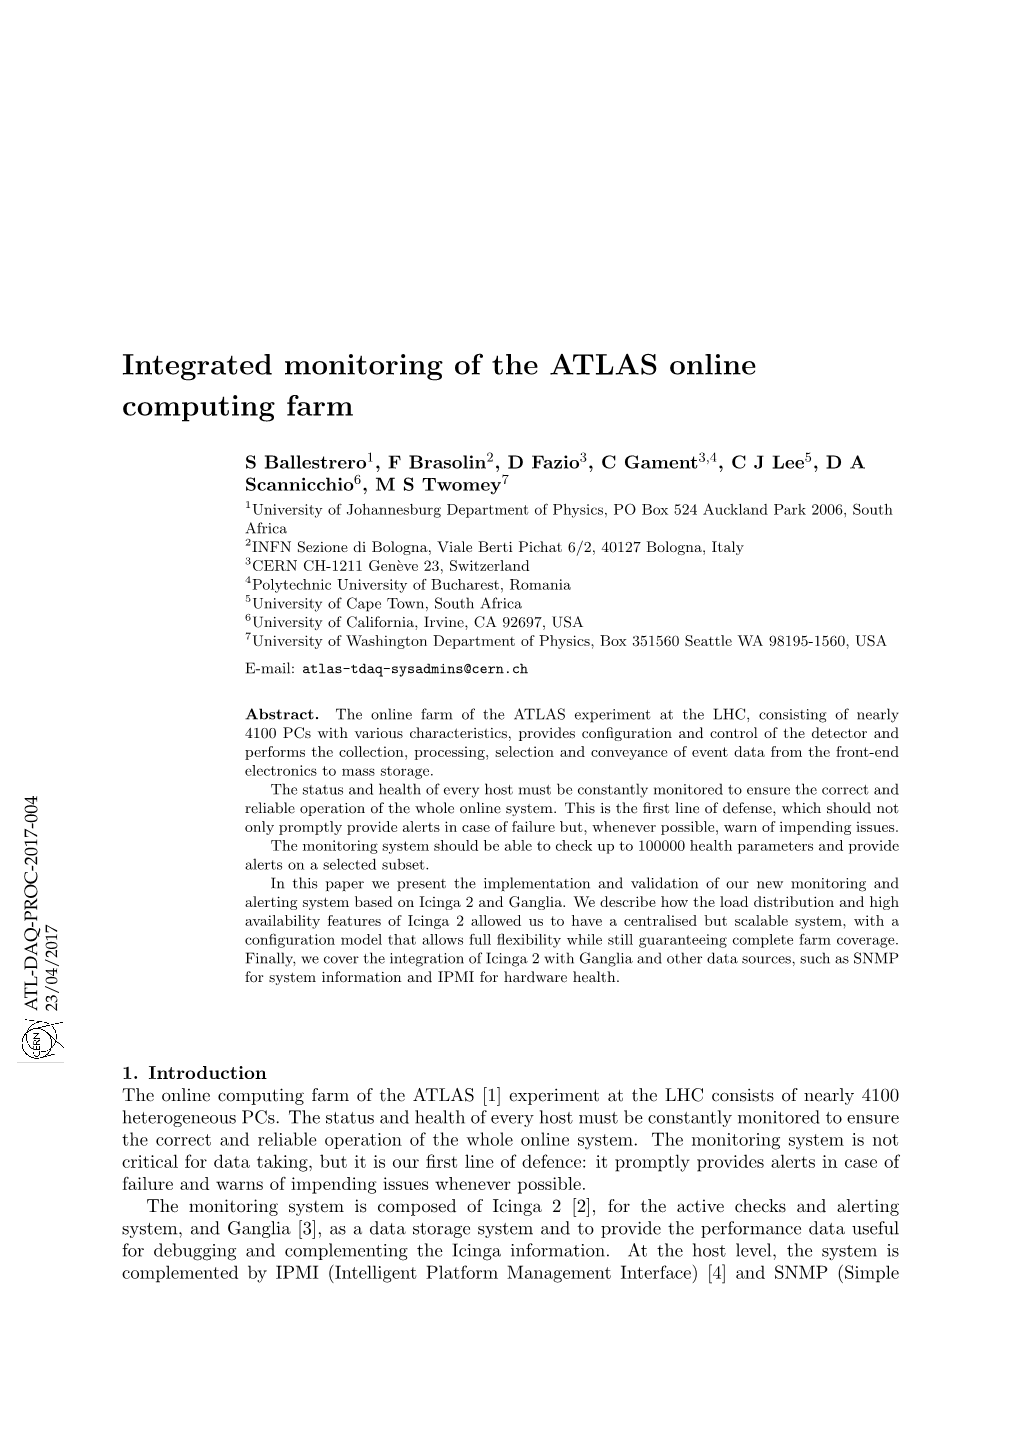 Integrated Monitoring of the ATLAS Online Computing Farm